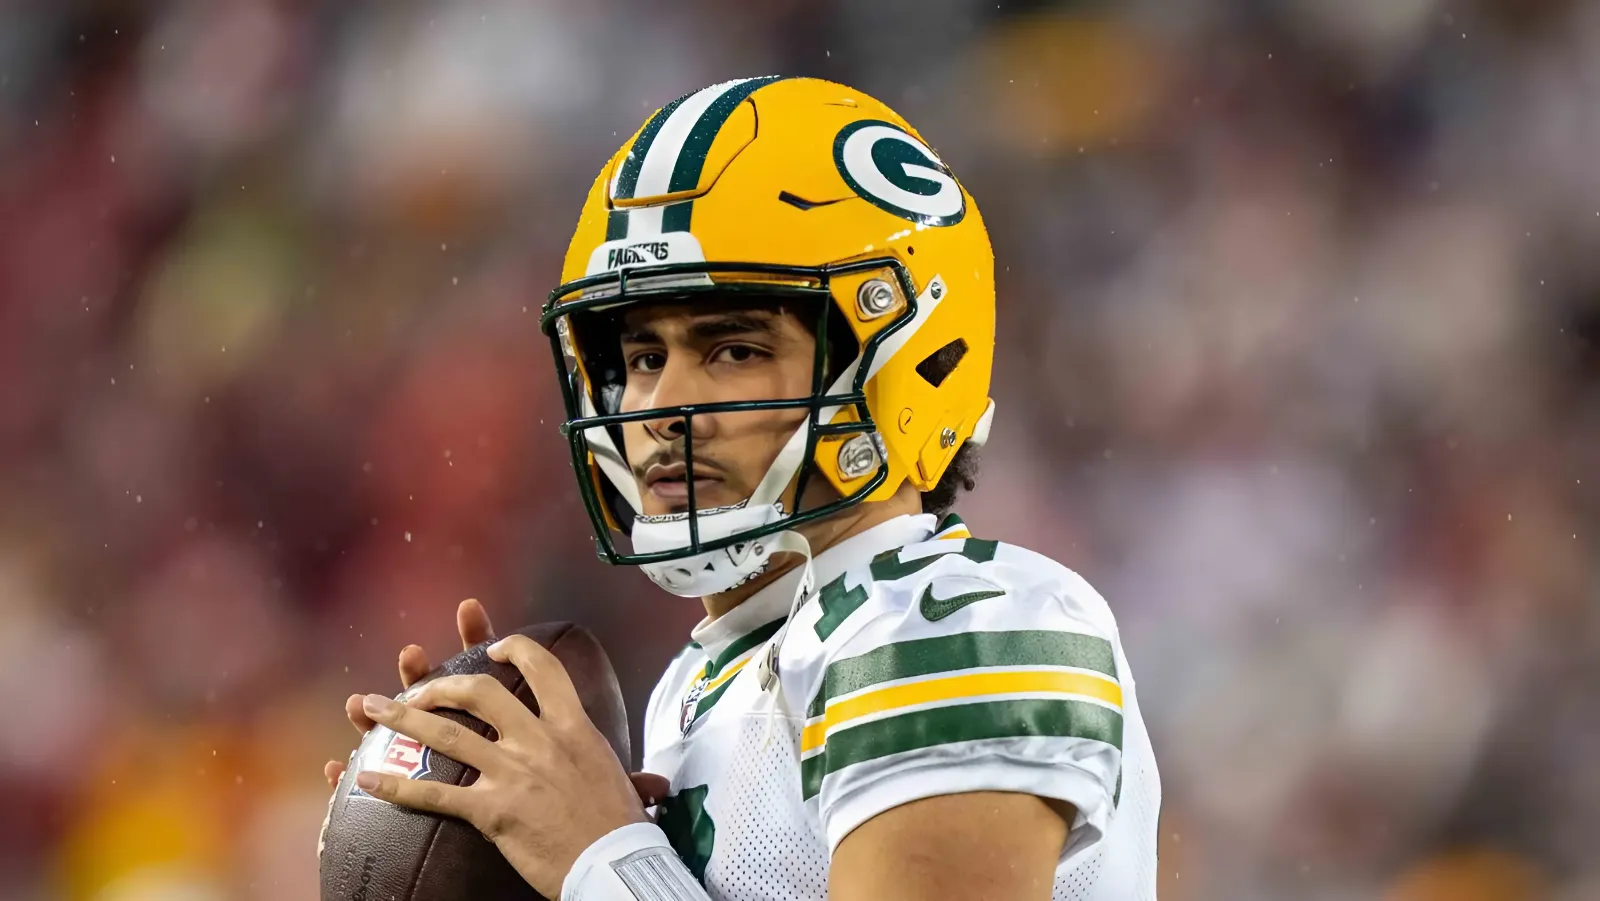 Packers News: NFL Analysts Explains Why Jordan Love Will Be a “Top-Tier” NFL Quarterback in 2024